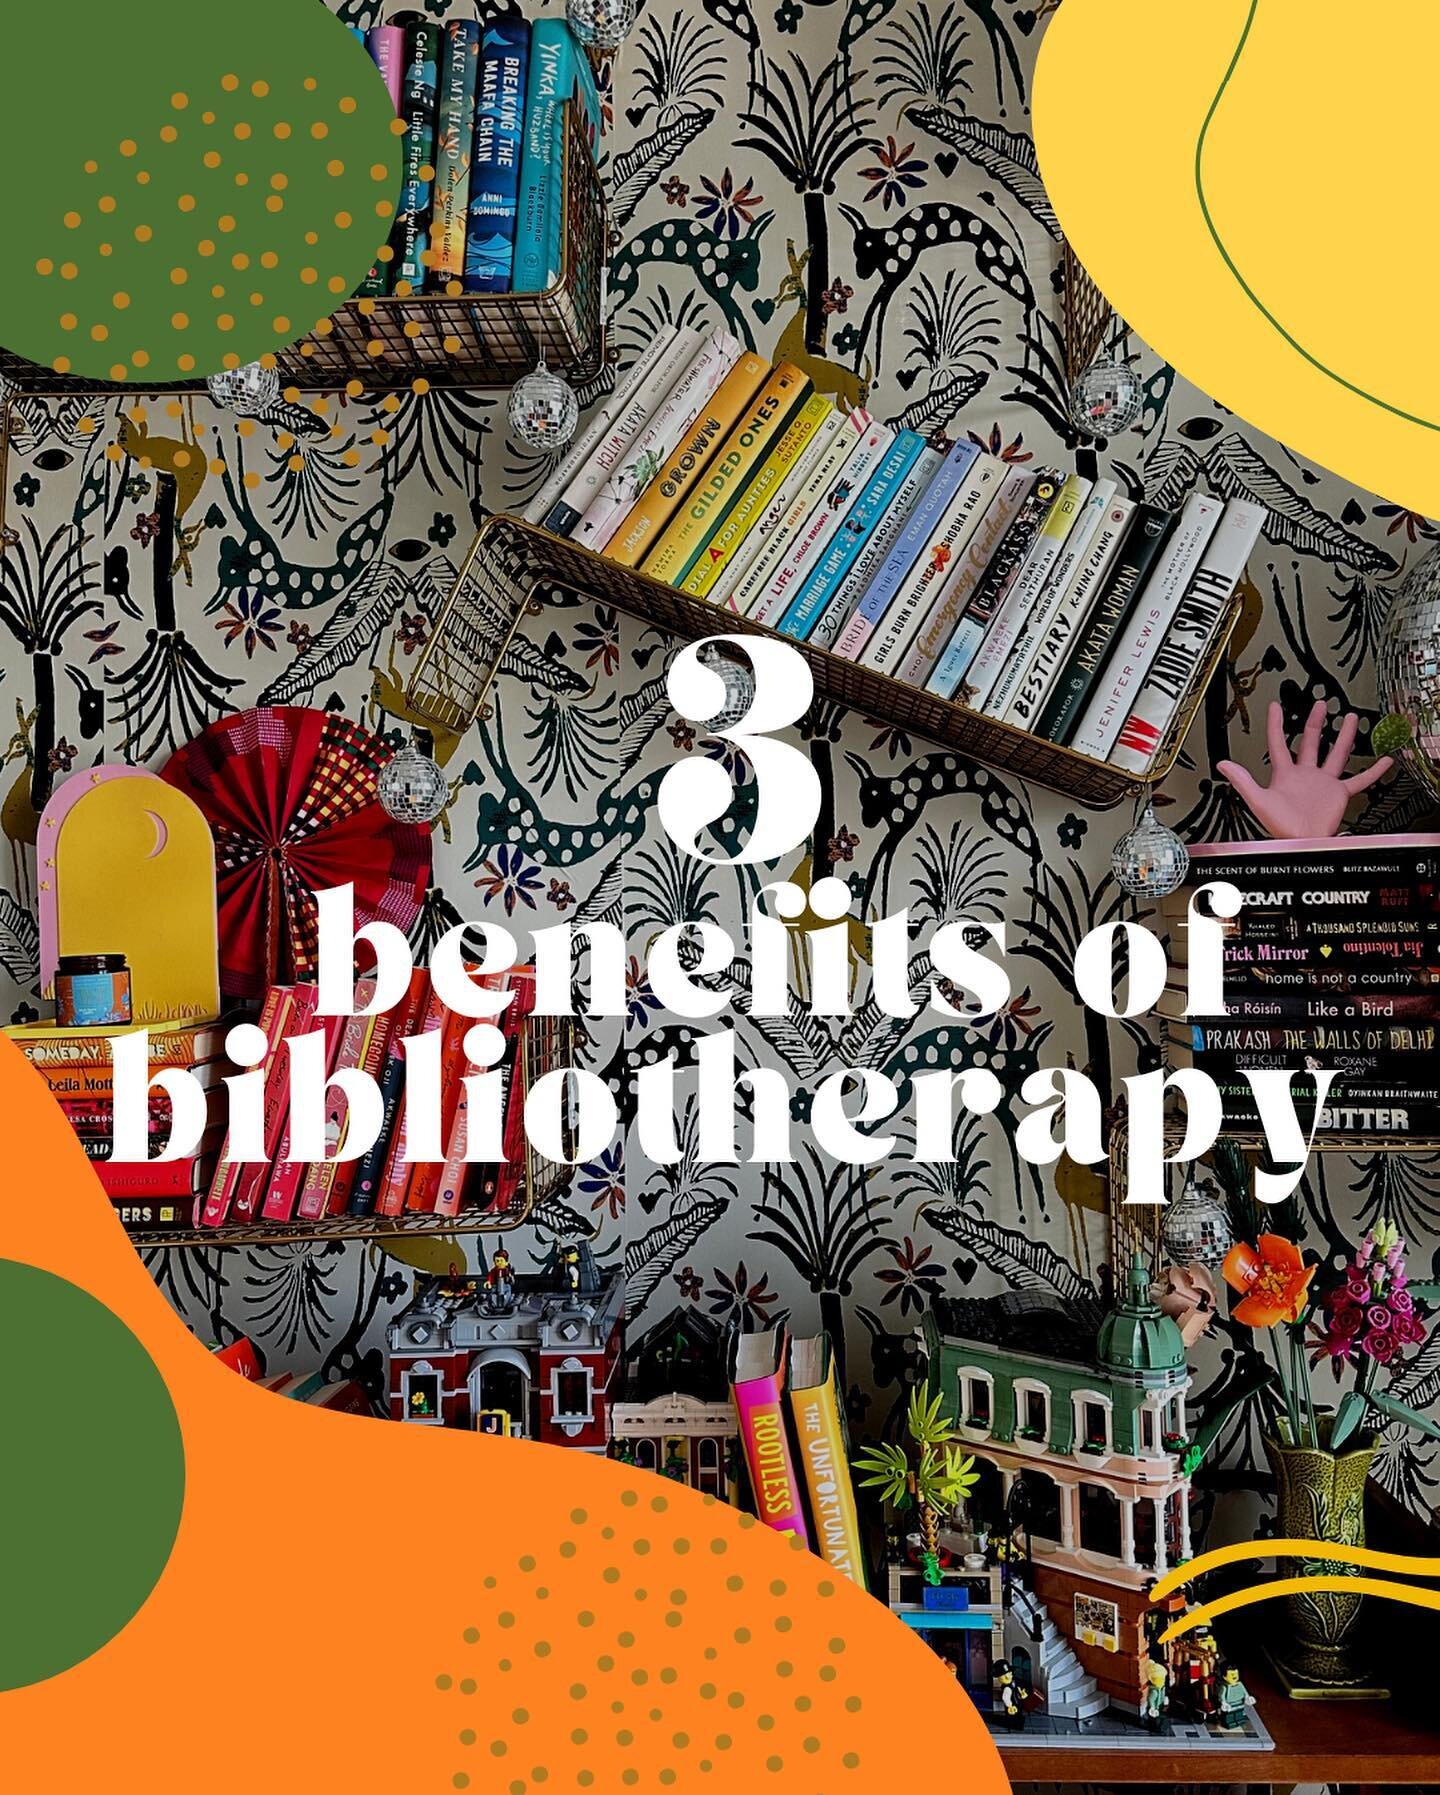 Bibliotherapy has so many benefits but here are some of my favs! 
Sometimes when we are going through a tough time, it can feel like no one truly understands us 😞
Books can be a great way to see ourselves in the characters and gain insight into how 